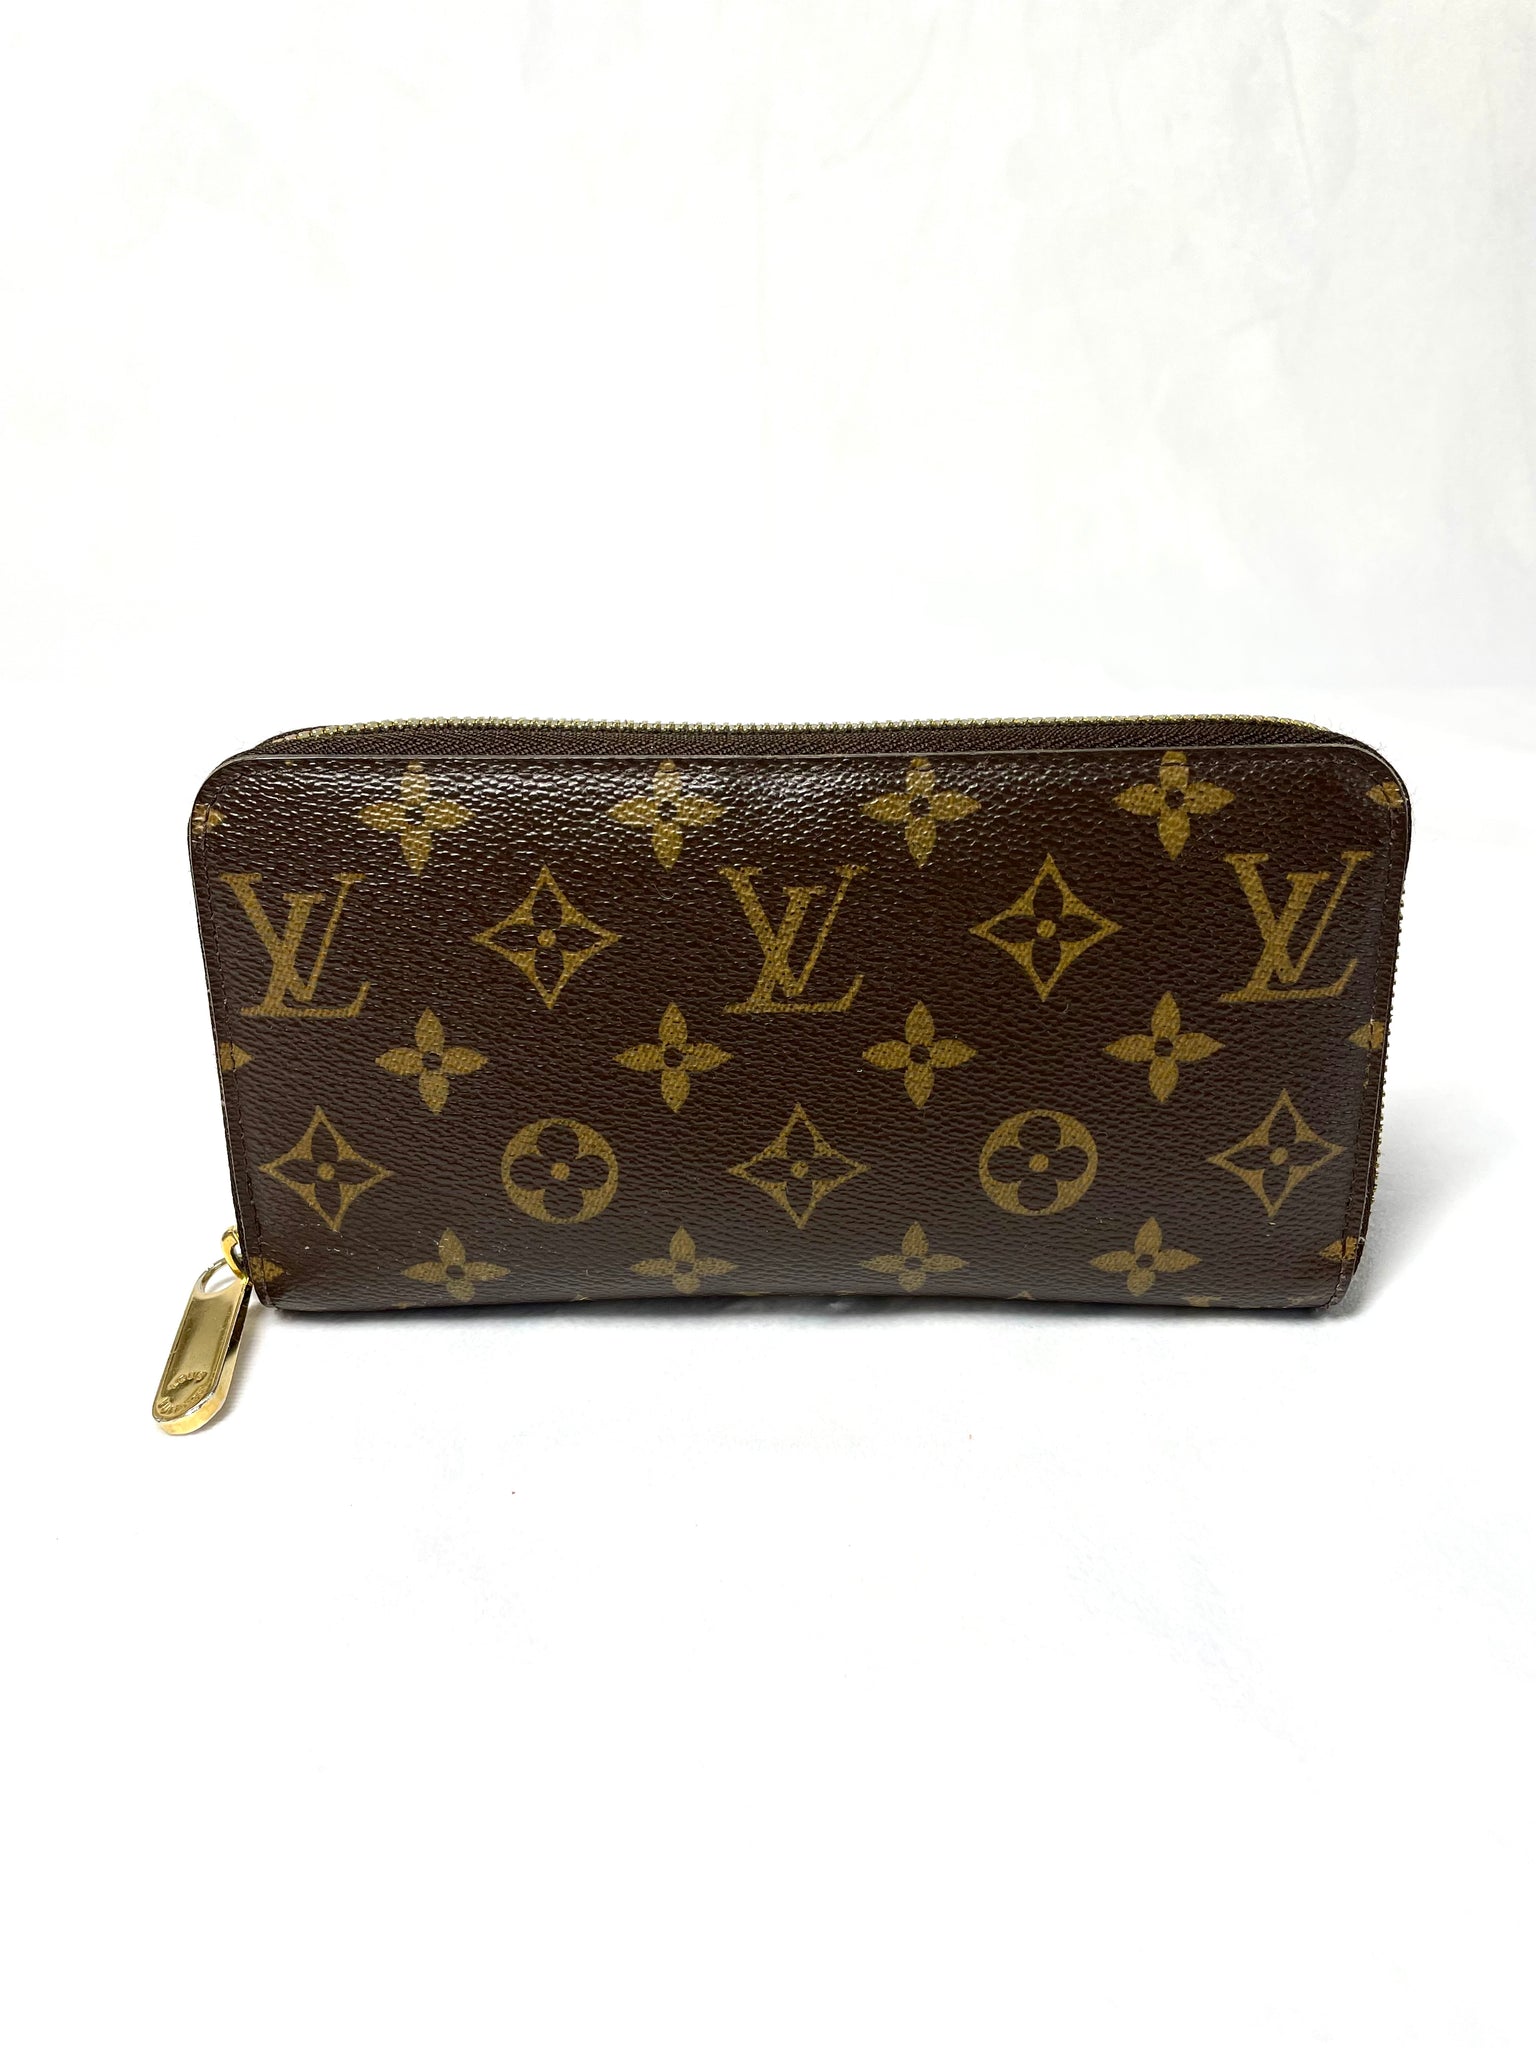 Pre Loved Louis Vuitton Zippy Wallet in Monogram available at UniKoncept in Waterloo